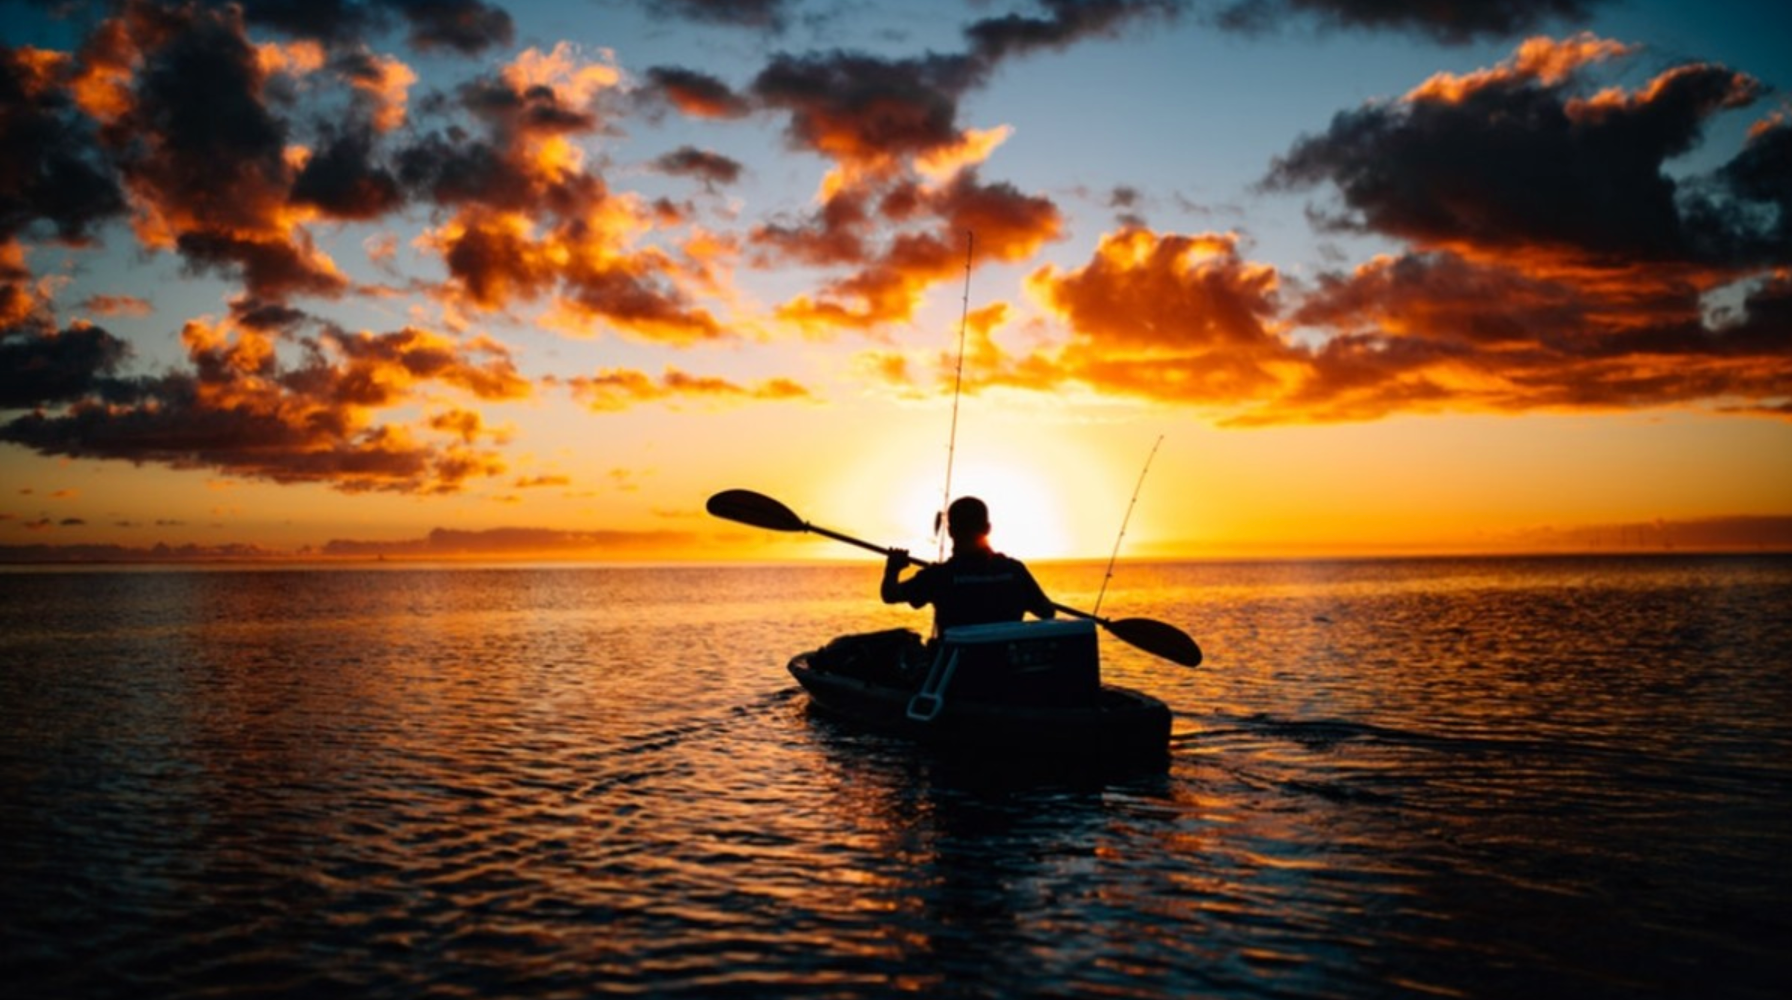 10 Issues Anglers Face When Kayak Fishing - Part 1